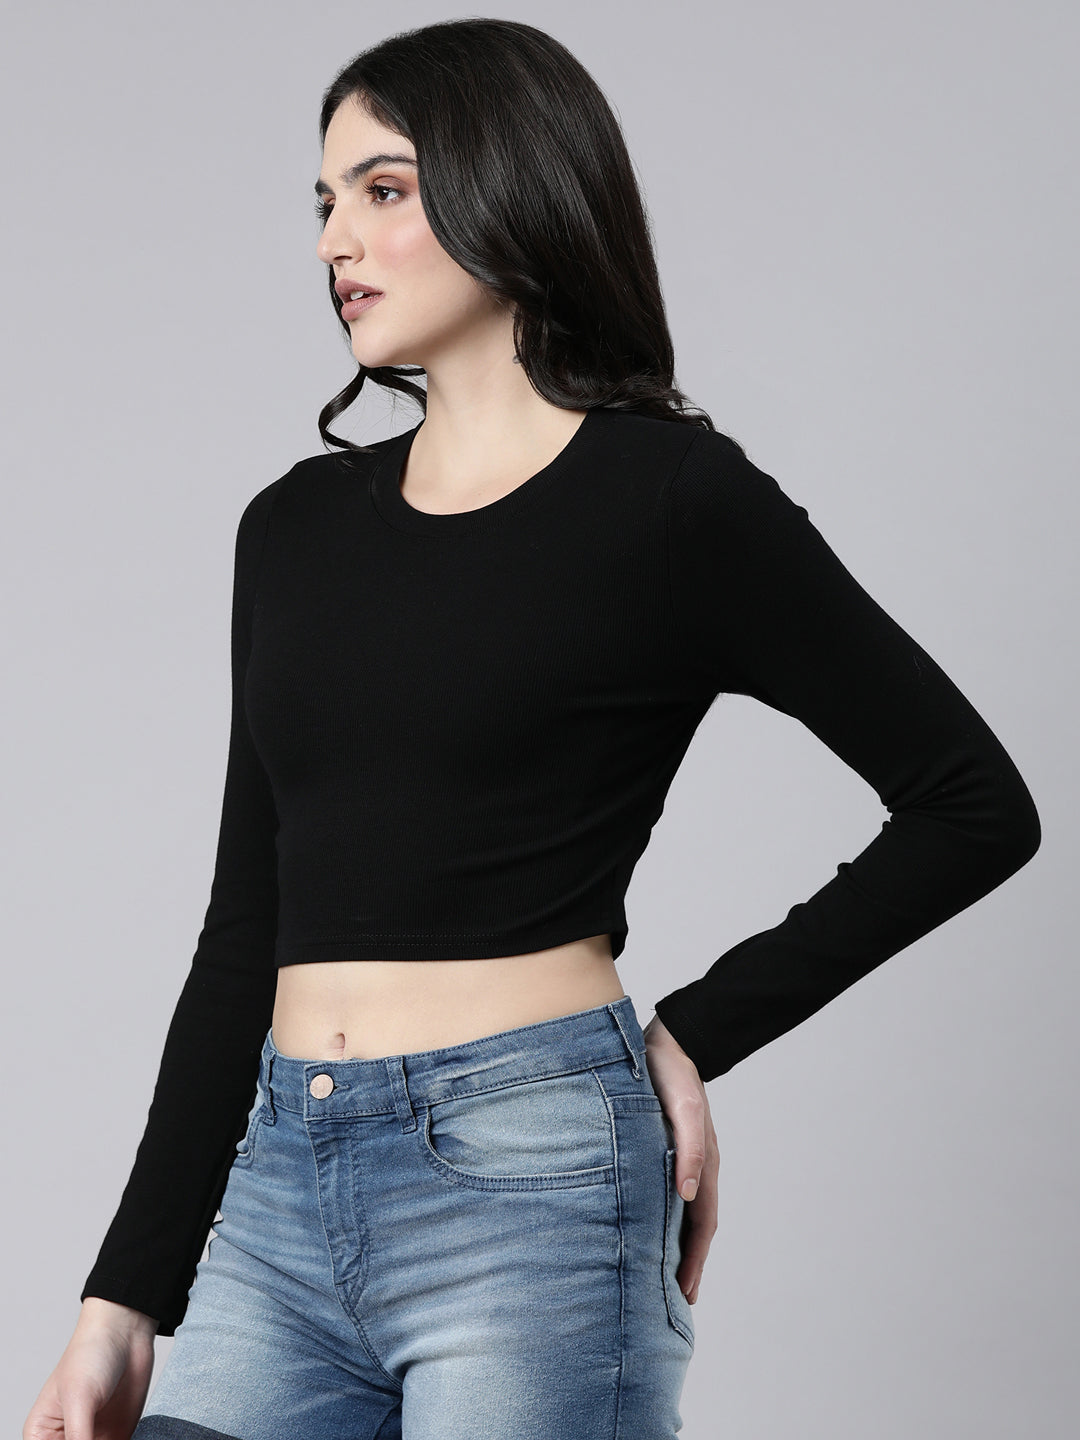 Women Solid Black Styled Back Crop Top